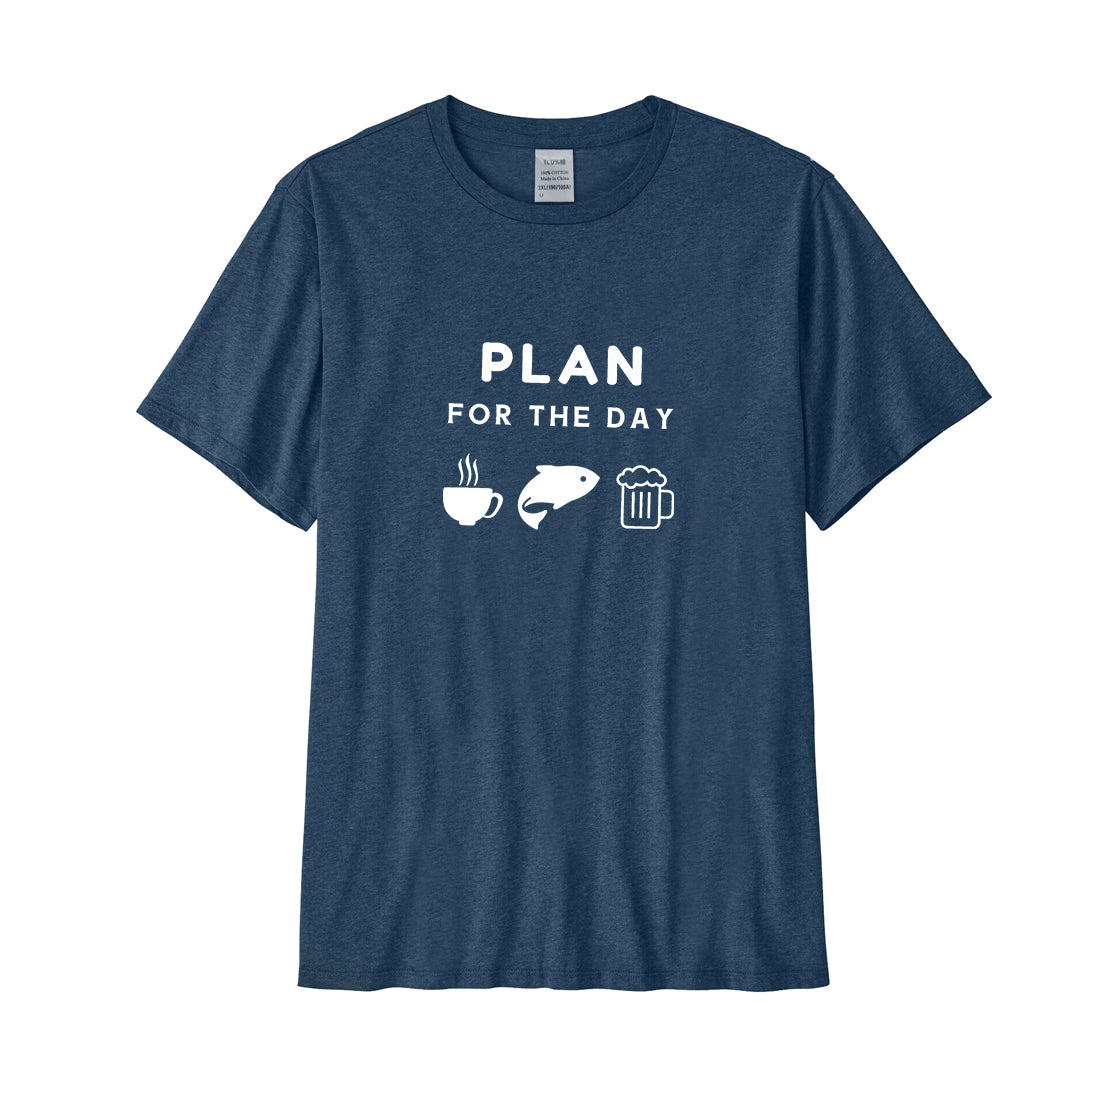 PLAN FOR THE DAY Performance T-Shirt